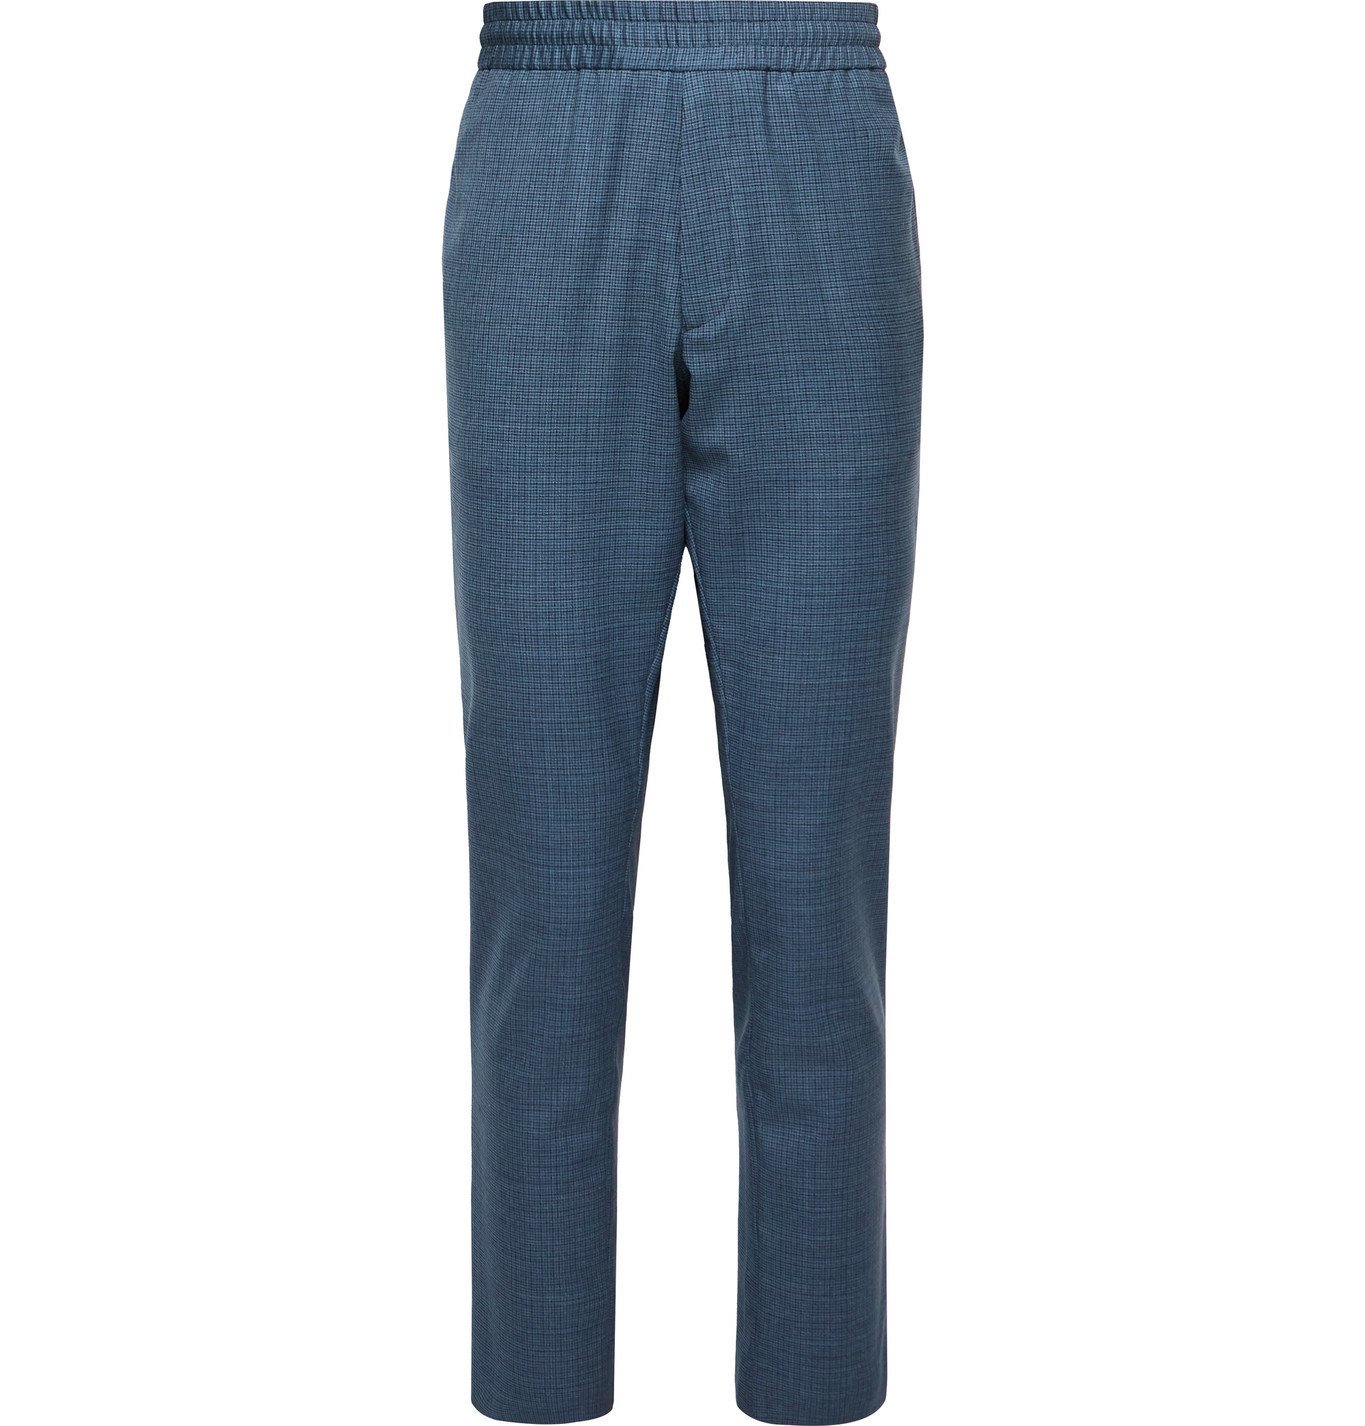 PAUL SMITH - Slim-Fit Micro-Checked Wool Trousers - Blue Paul Smith